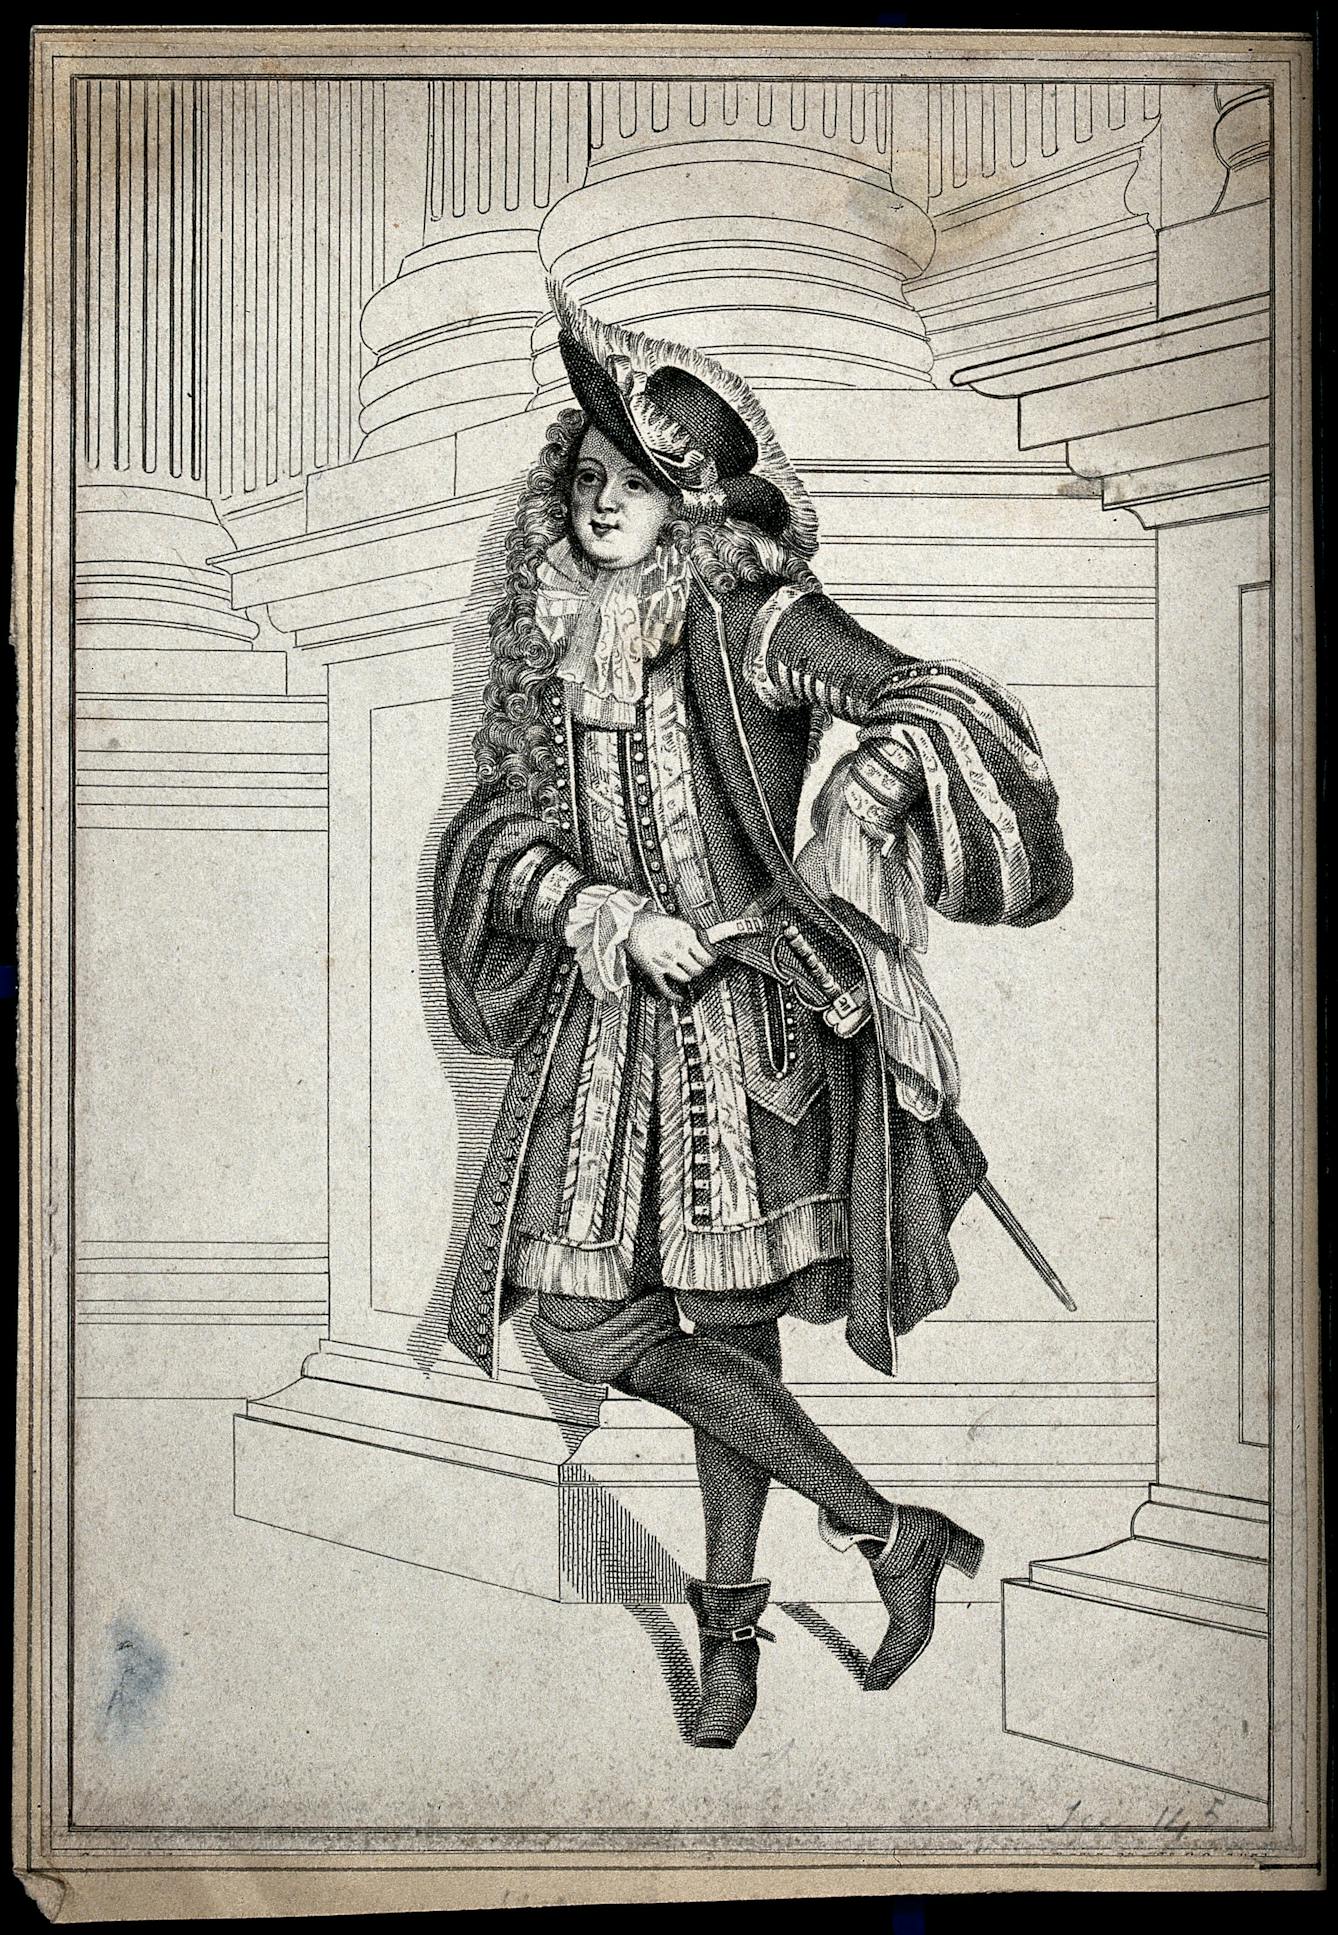 A man dressed in seventeenth century costume leaning against the socle of some double columns